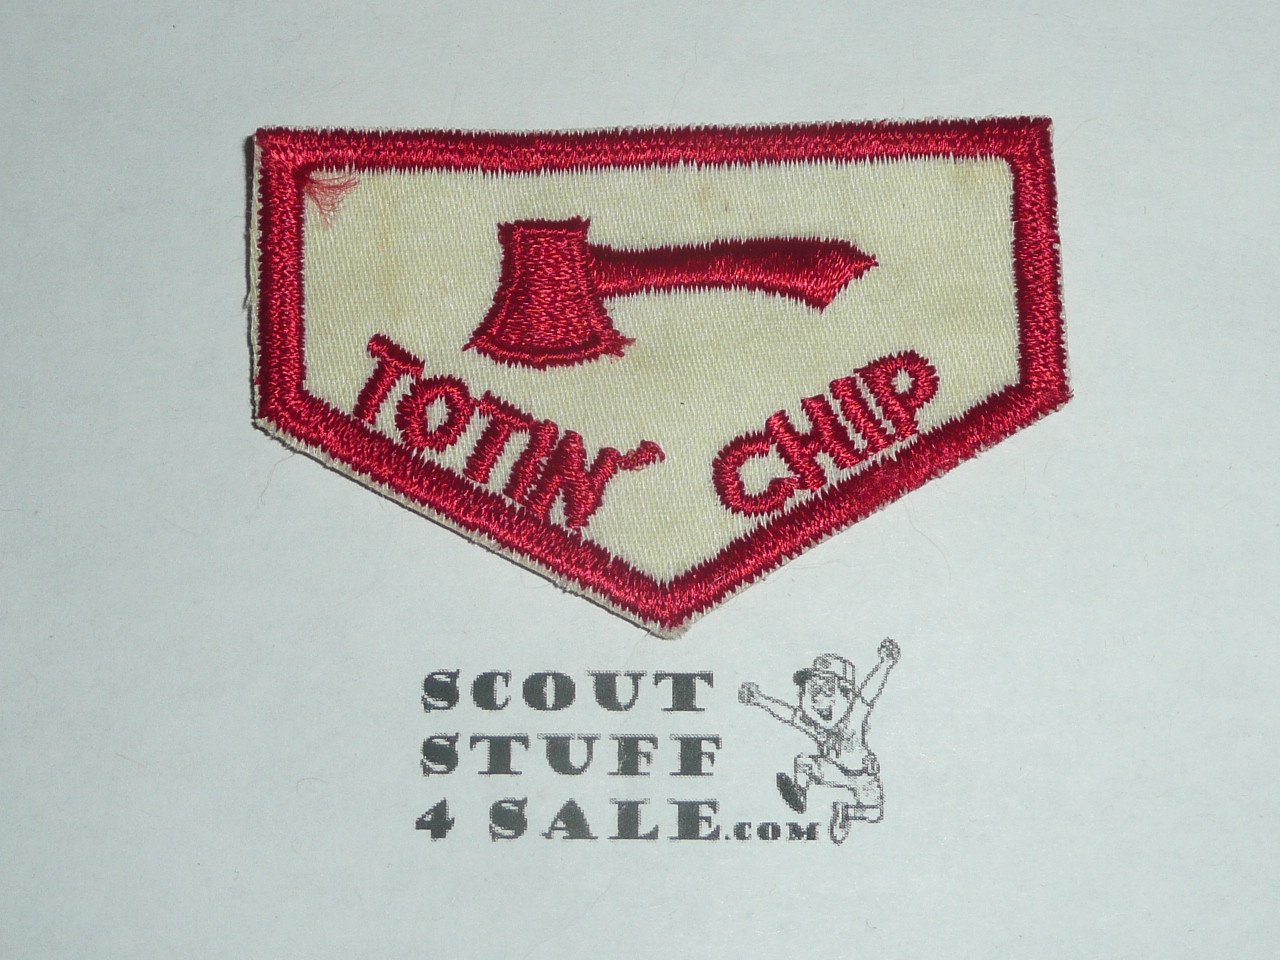 Totin' Chip Boy Scout knife/Axe Award Patch, white c/e twill, no fdl, large Axe